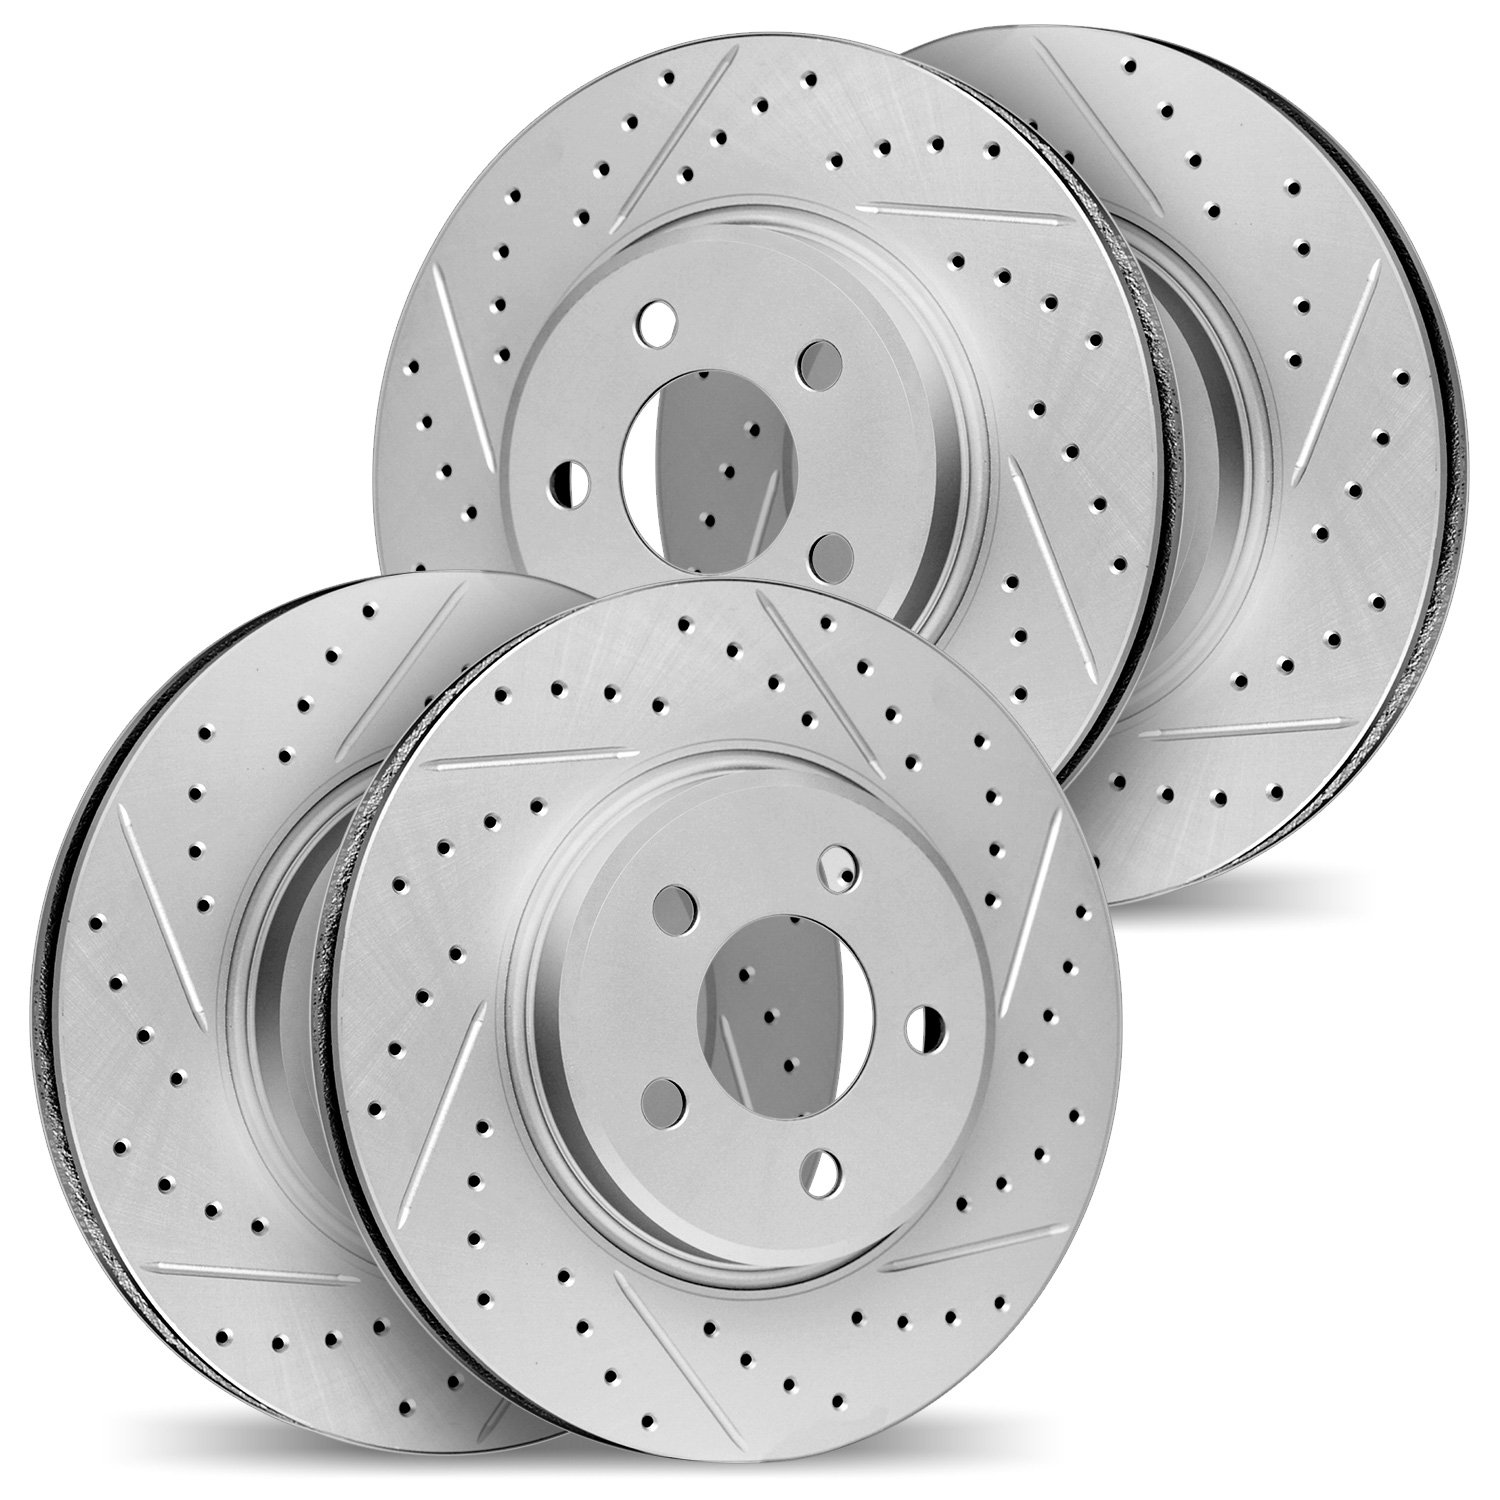 2004-75007 Geoperformance Drilled/Slotted Brake Rotors, 2007-2011 Lexus/Toyota/Scion, Position: Front and Rear